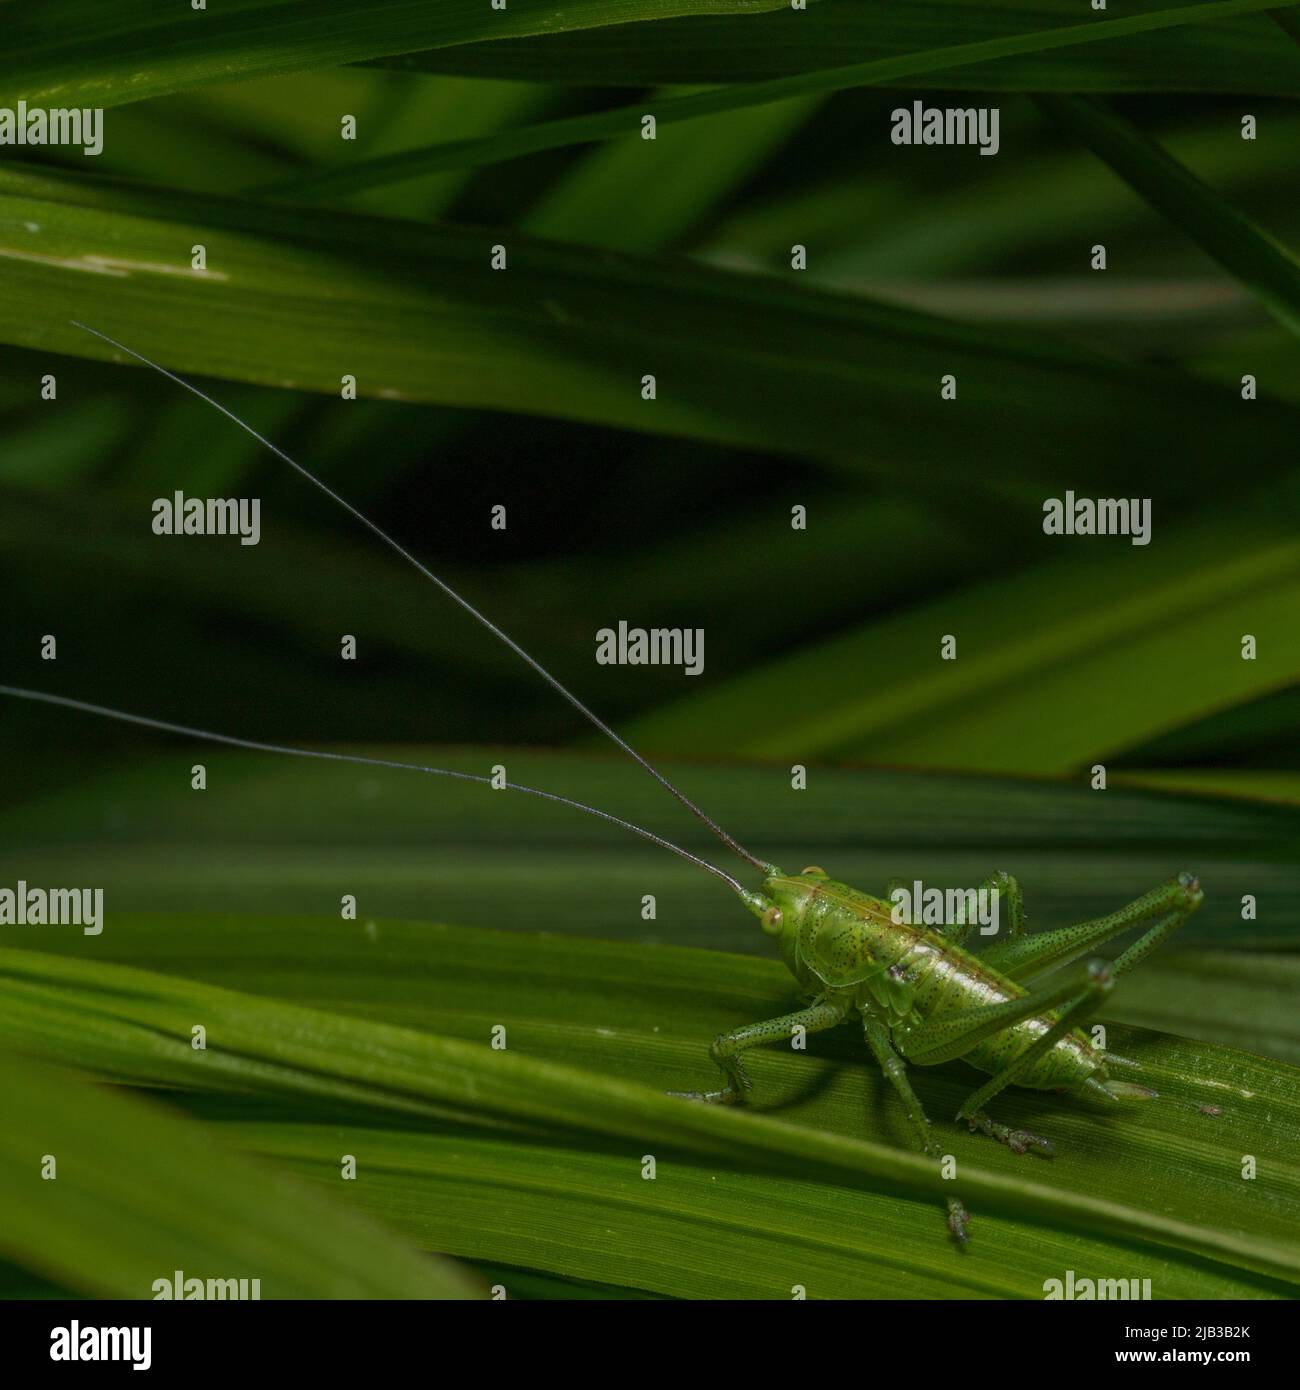 Close Up of a Green grasshopper sitting on a green leaf. Grasshopper in nature. Stock Photo